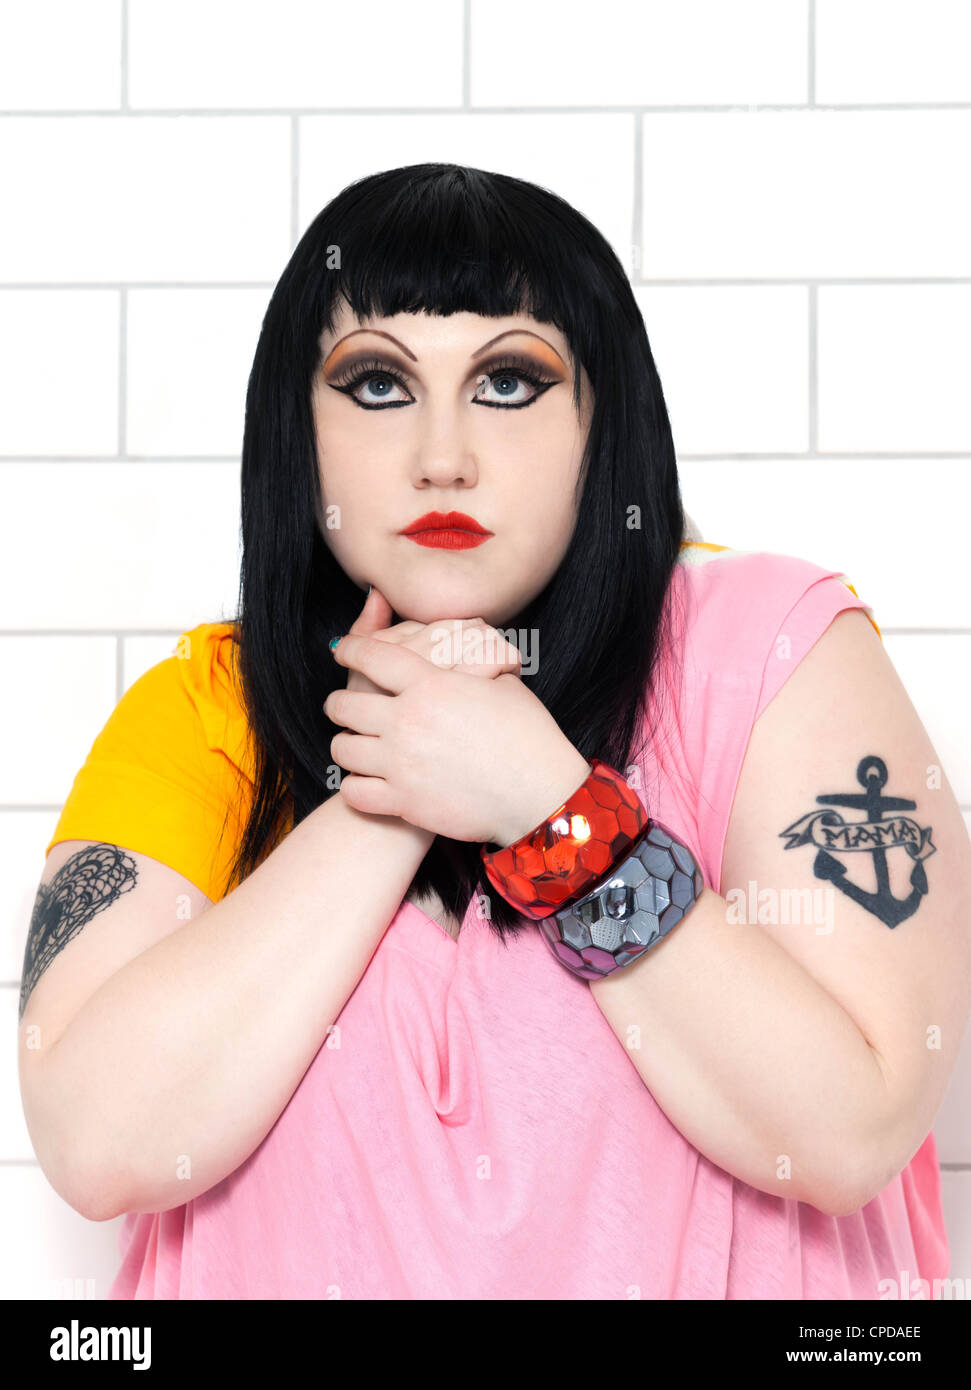 London, UK - January 31, 2012: beth ditto portrait of the pop group gossip in a bathroom at London, UK on january 31th, 2012 Stock Photo